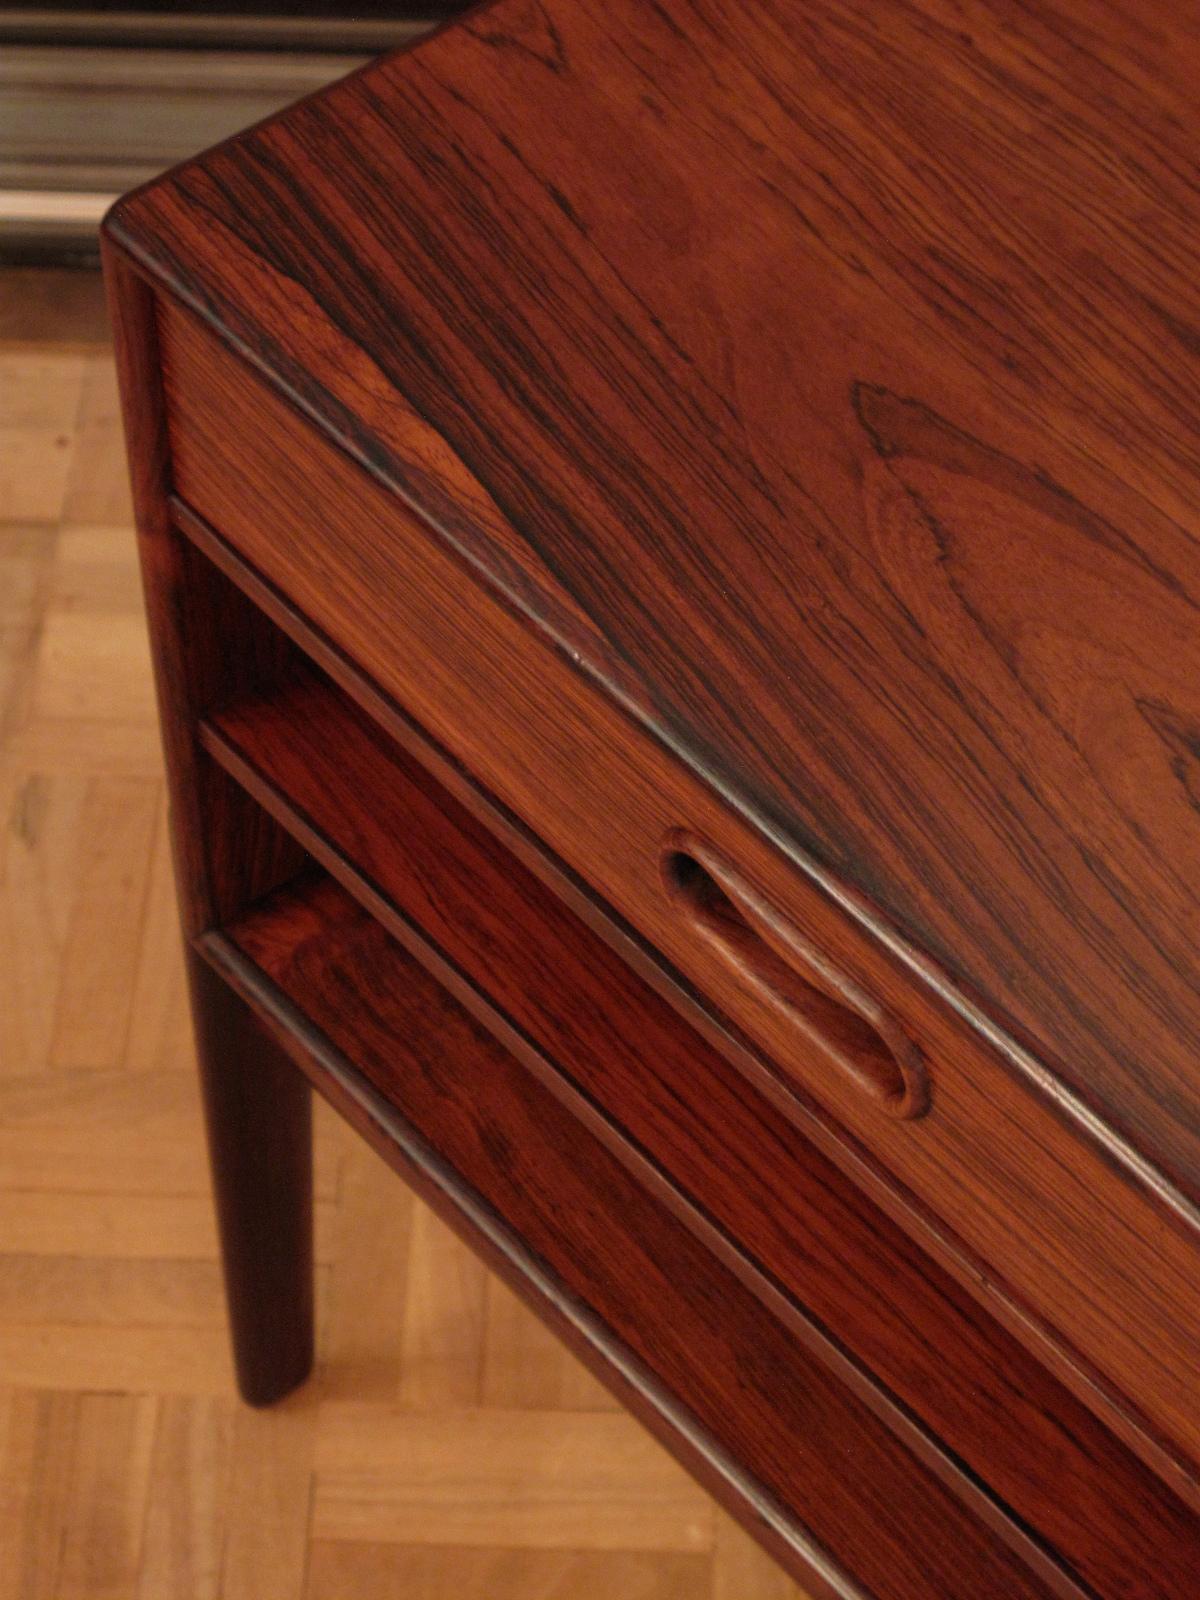 One of our favorite designs by Arne Vodder and exceptionally hard to find, especially in rosewood.

A very handsome and beautifully constructed little chest of drawers that works very well as a side table or bedside table due to its compact